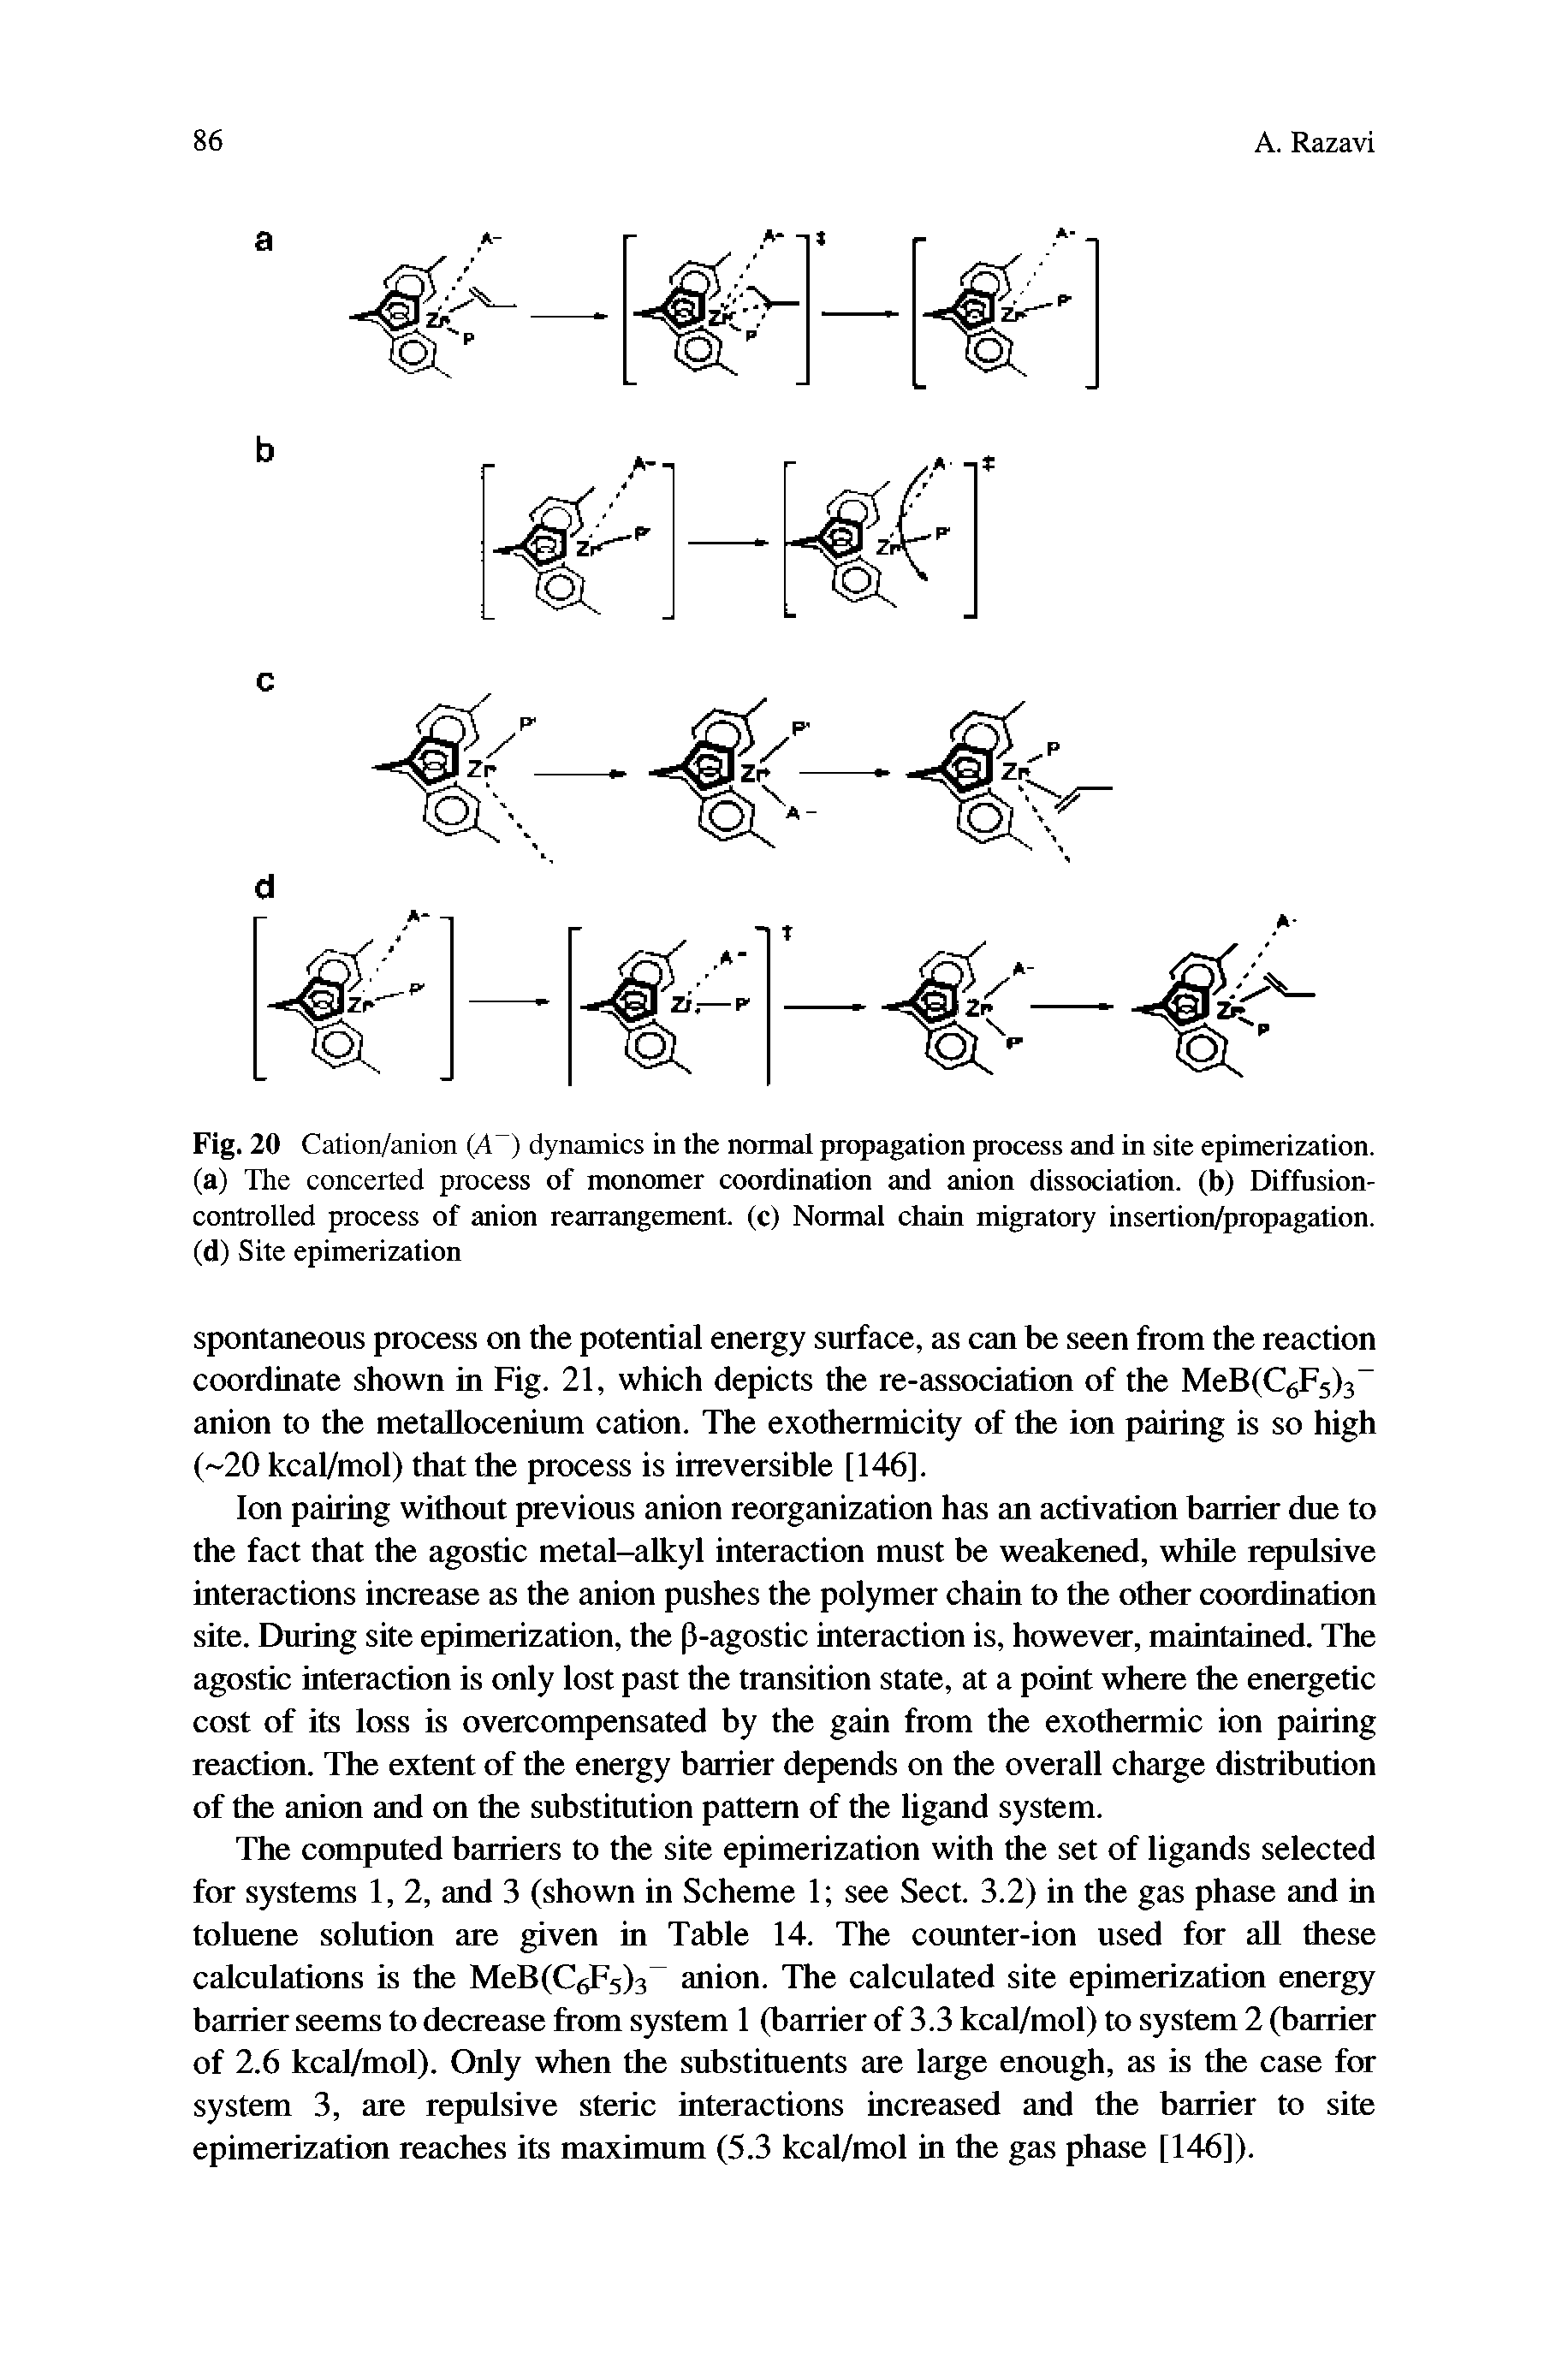 Fig. 20 Cation/anion (A ) dynamics in the normal propagation process and in site epimerization. (a) The concerted process of monomer coordination and anion dissociation, (b) Diffusion-controlled process of anion rearrangement, (c) Normal chain migratory insertion/propagation. (d) Site epimerization...